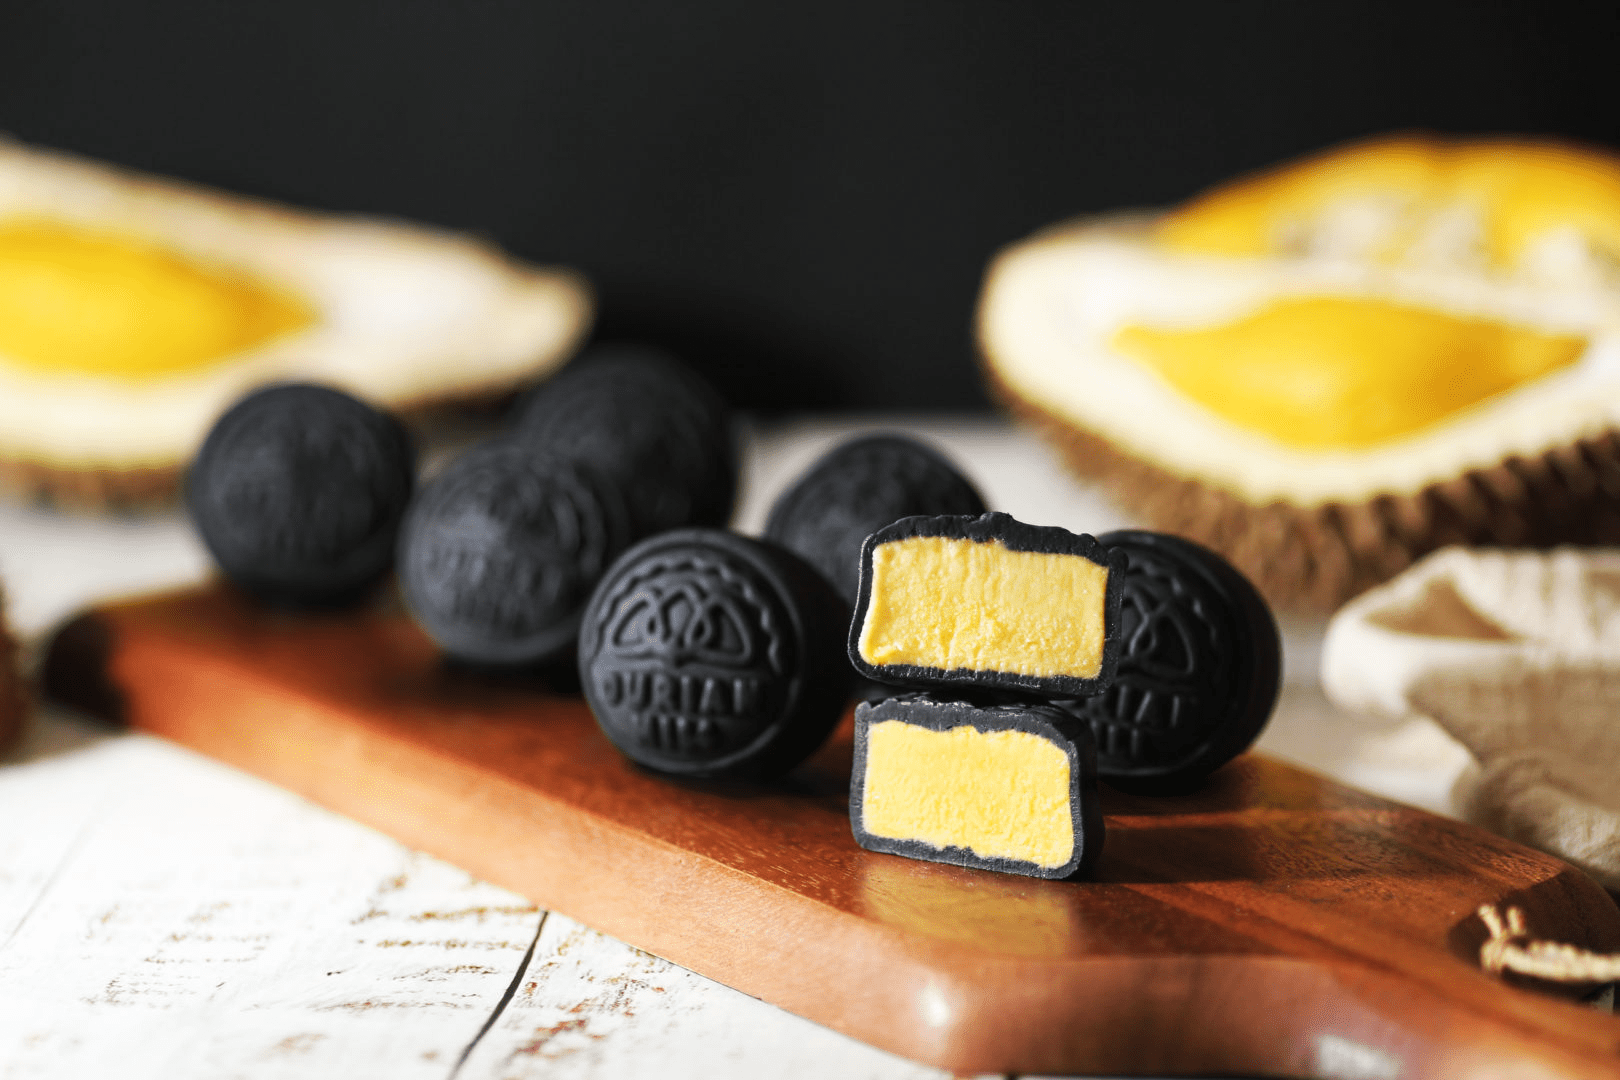 Durian Hill Charcoal Mooncakes